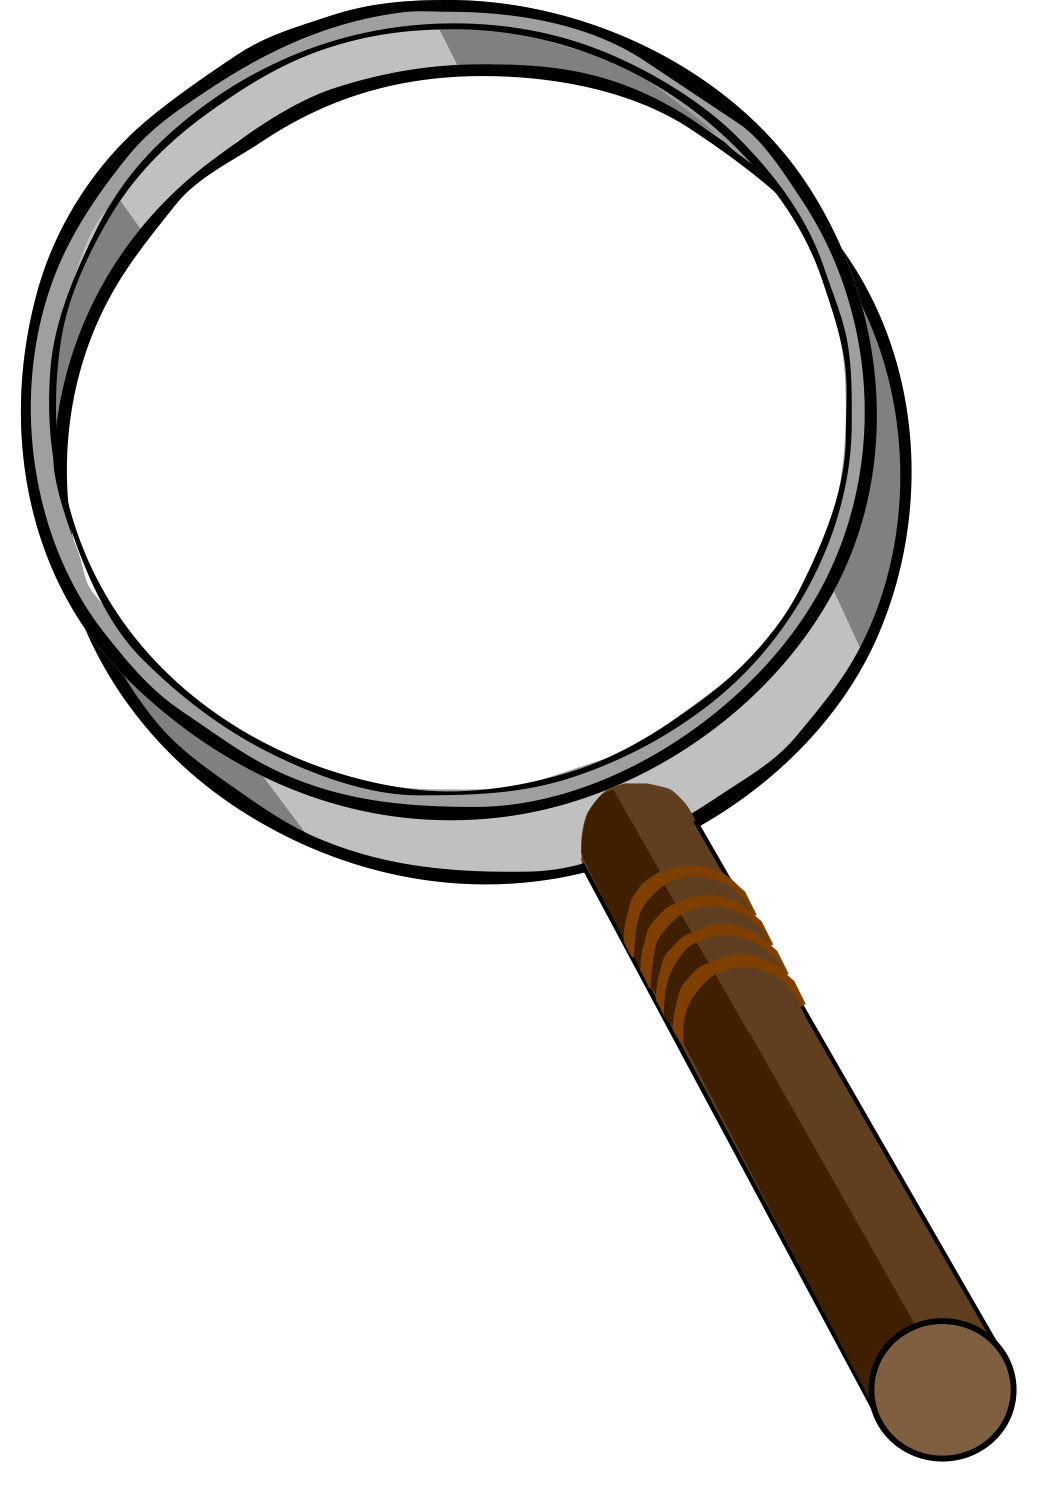 magnify-glass-icon-png-clip-art-library